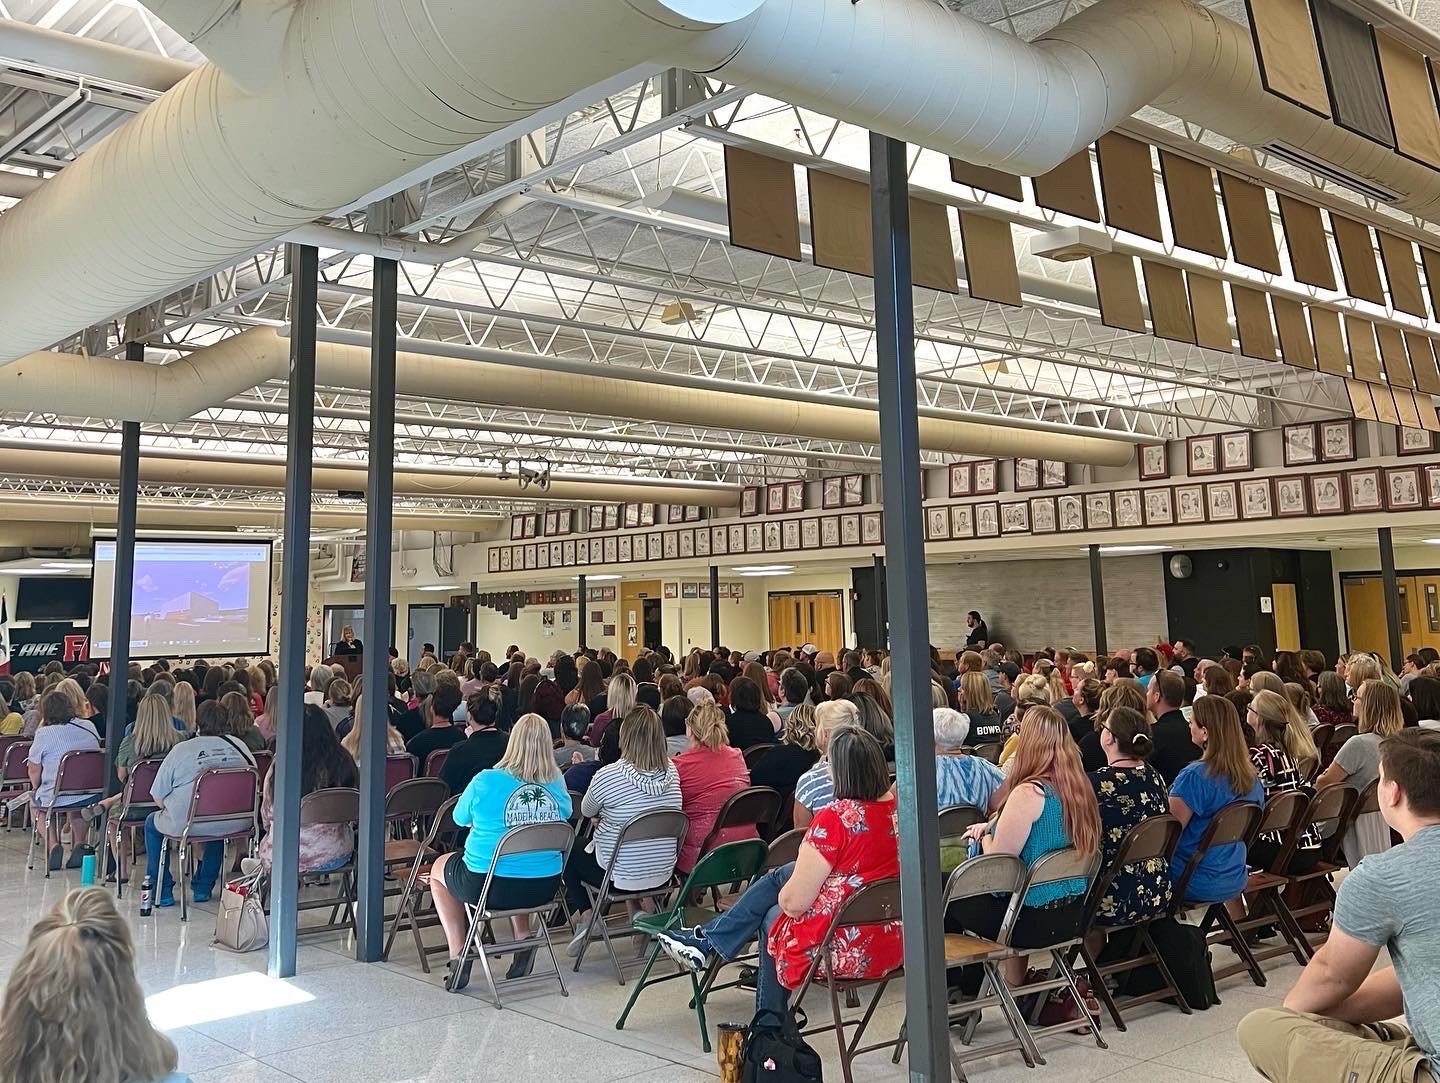 Fort Madison Superintendent Dr. Erin Slater welcomed back the FMCSD staff for the 2022-23 school year last week